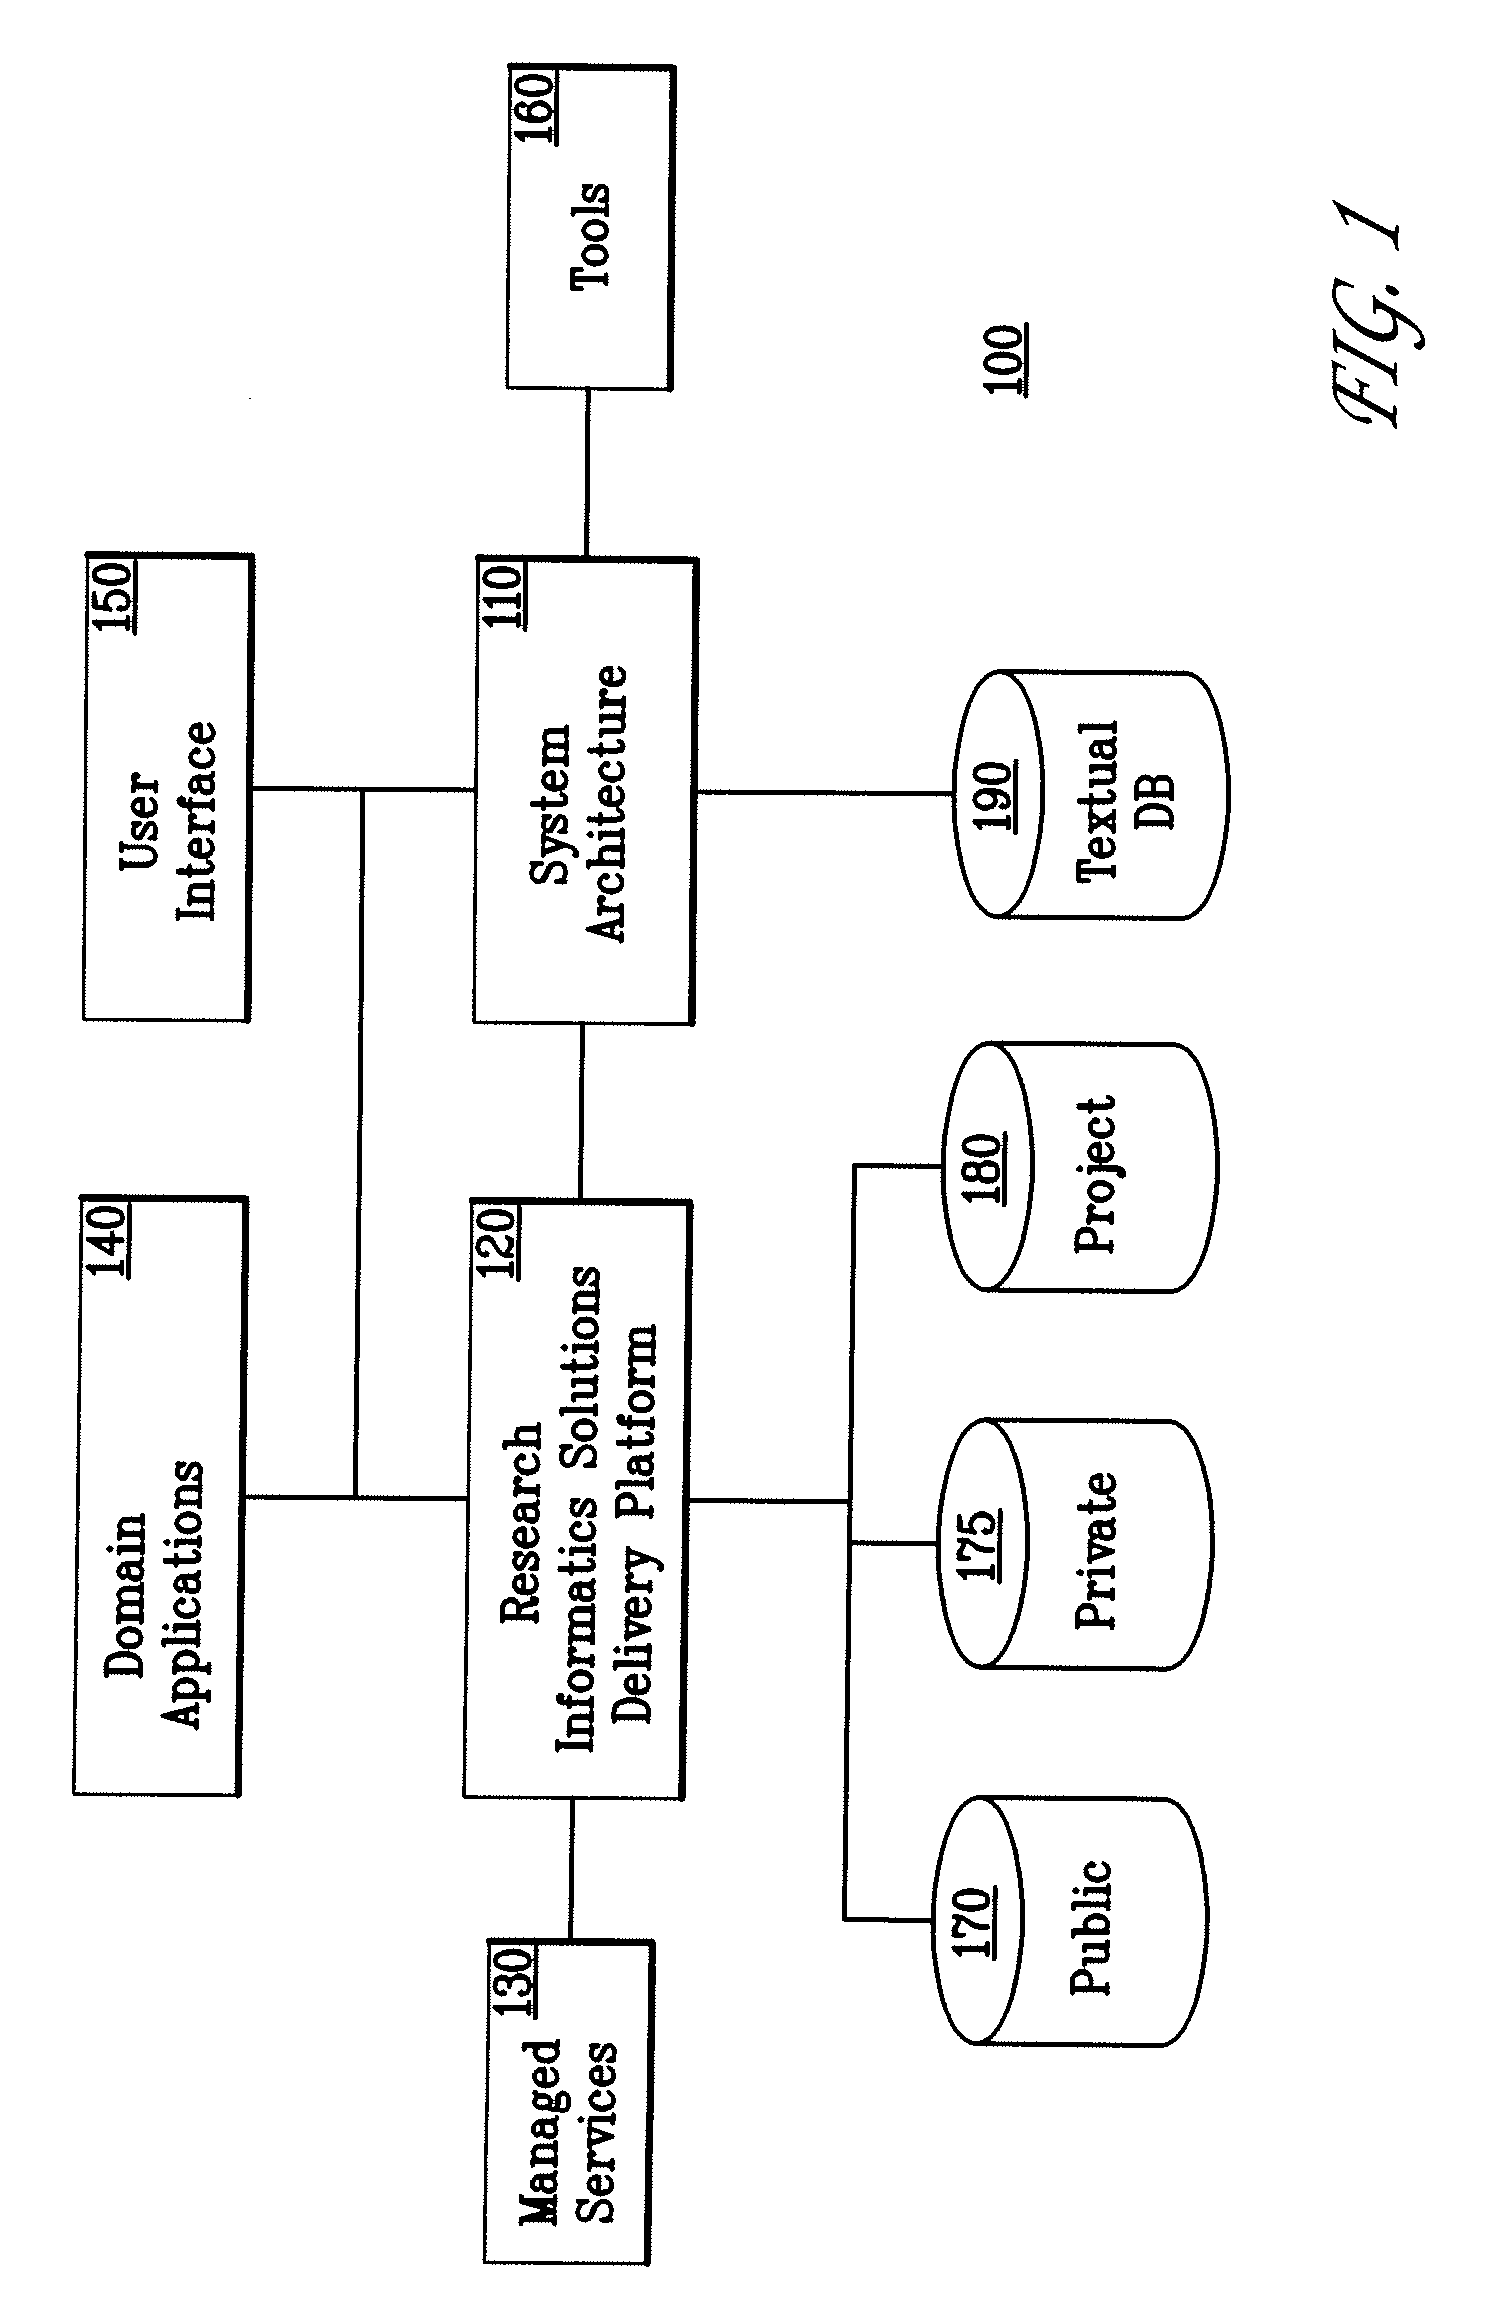 Bioinformatics system architecture with data and process integration